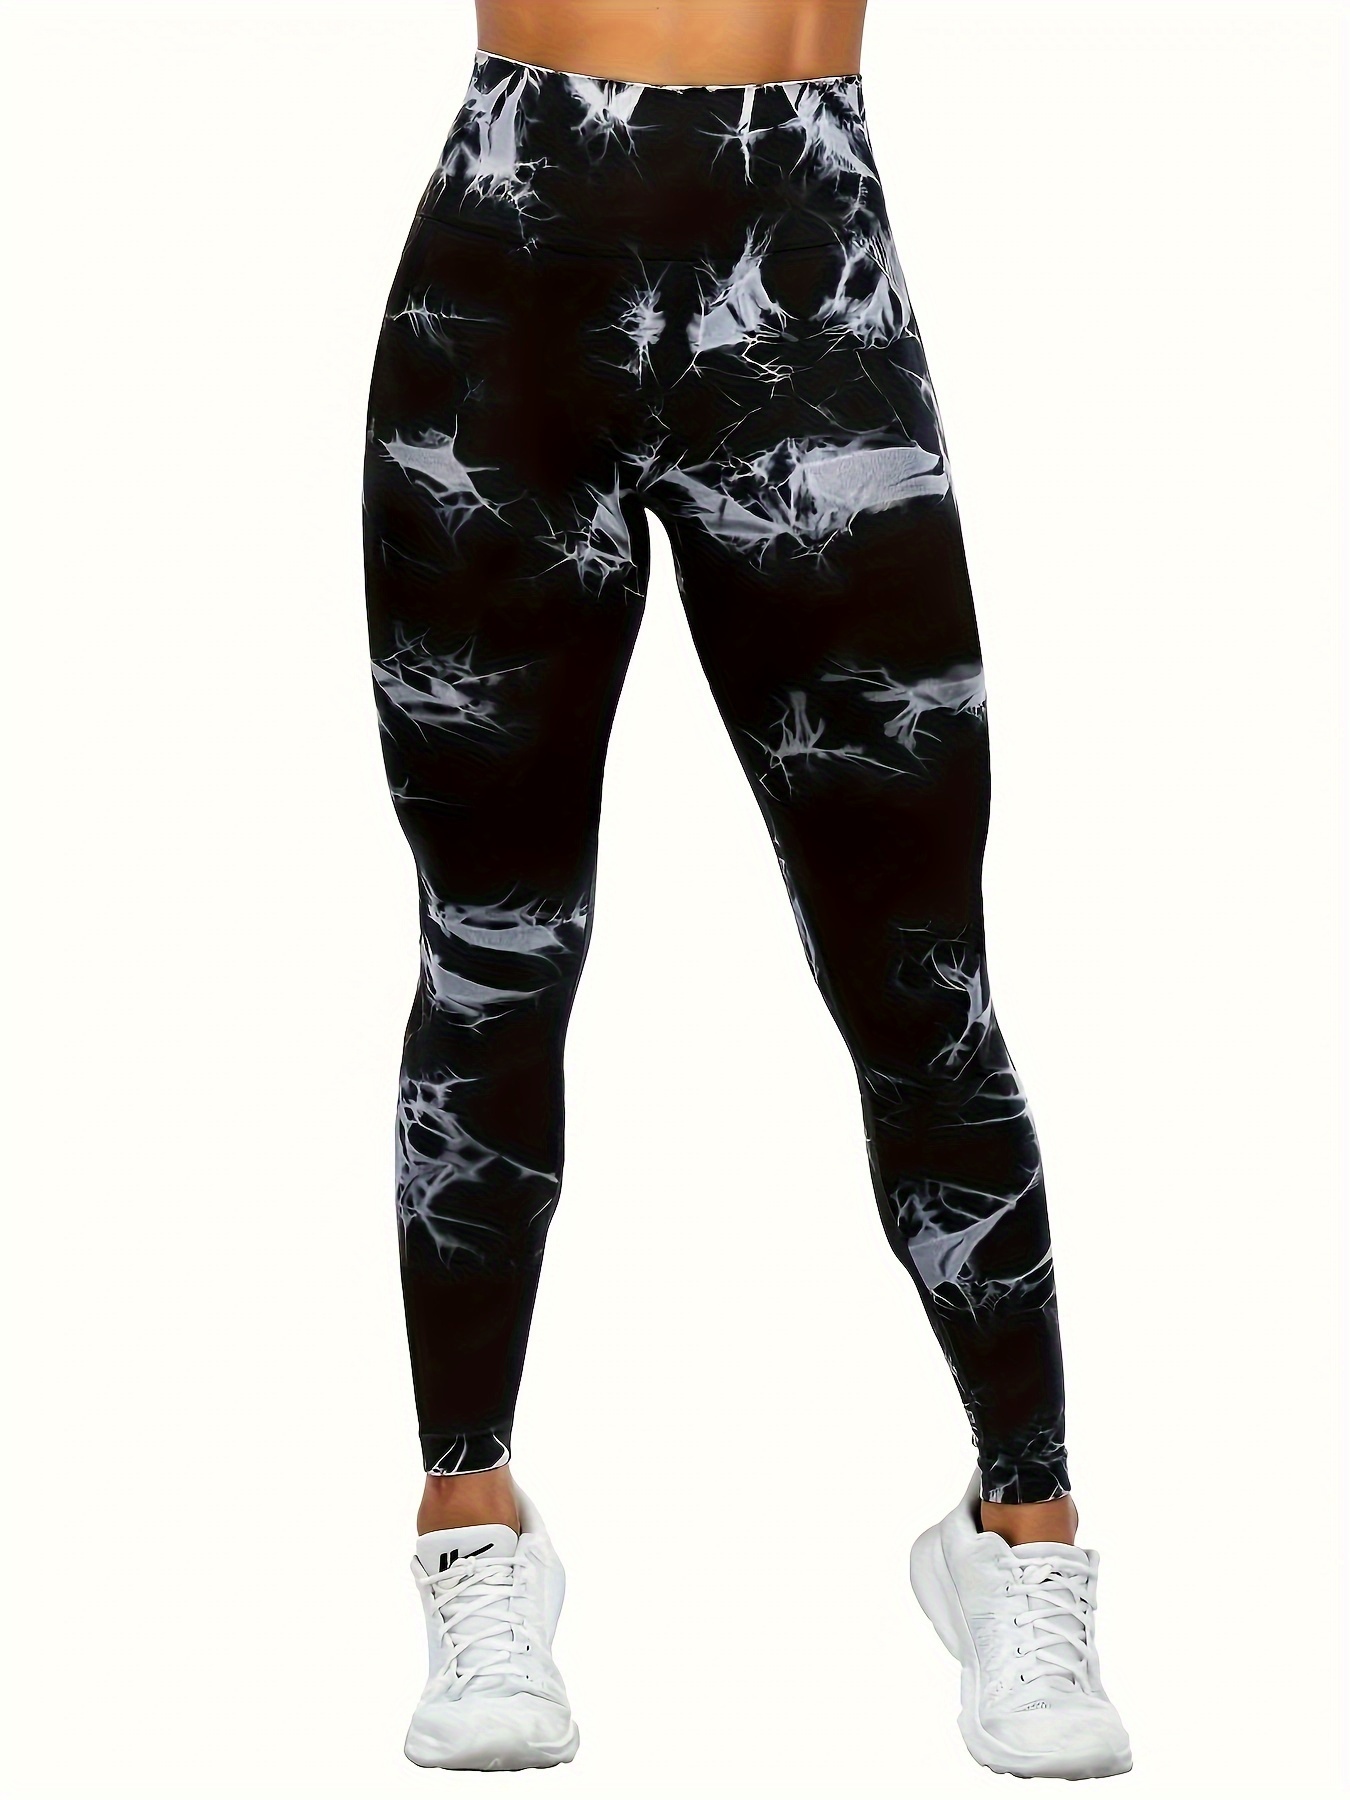 High Waist Tie Dye Tie Dye Gym Leggings For Women Stretchy, Athletic, And  Sexy Yoga Pants For Gym And Fitness From Peanutoil, $13.03